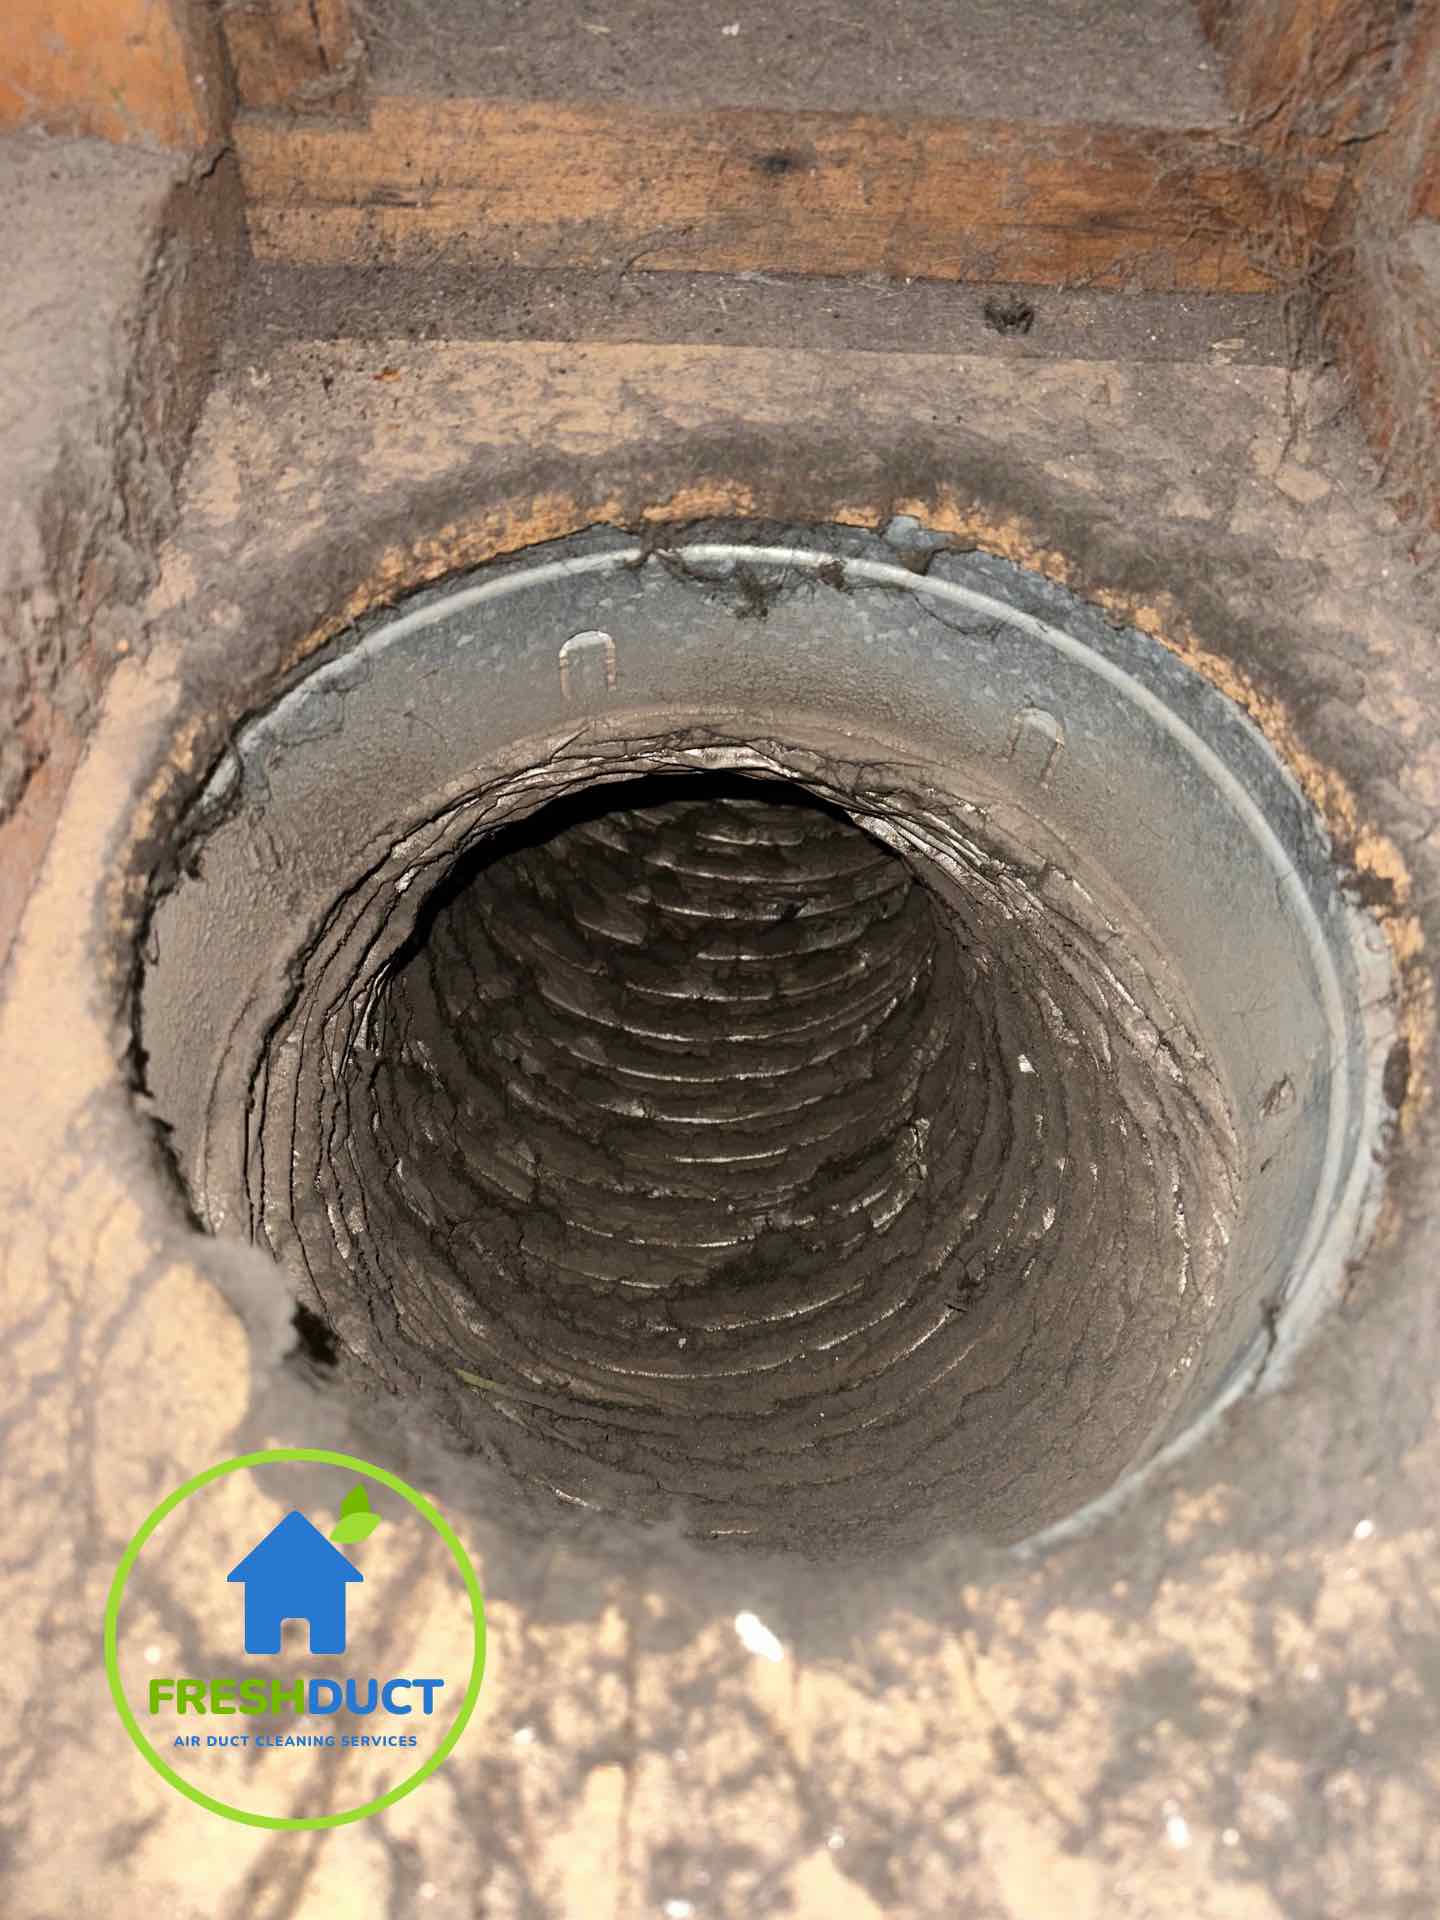 Duct cleaning Melbourne - Fresh Duct